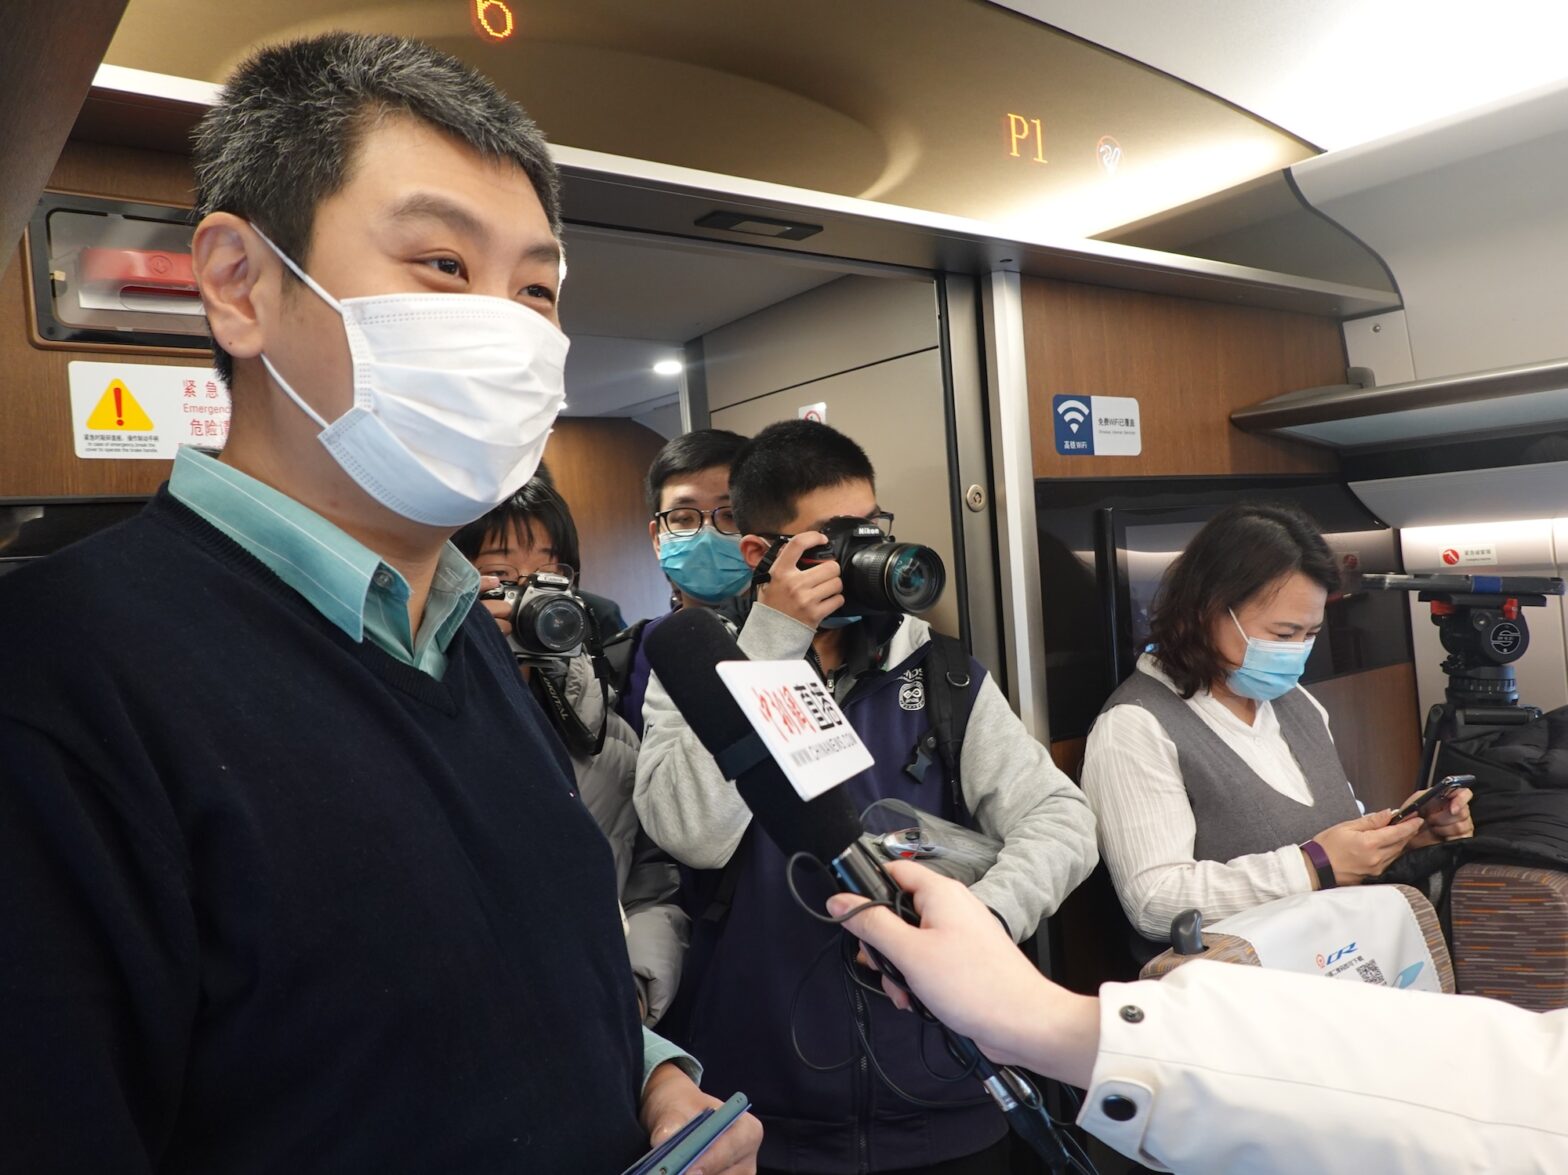 An image of David Feng being interviewed on the first Beijing-Xiongan intercity train to Xiongan